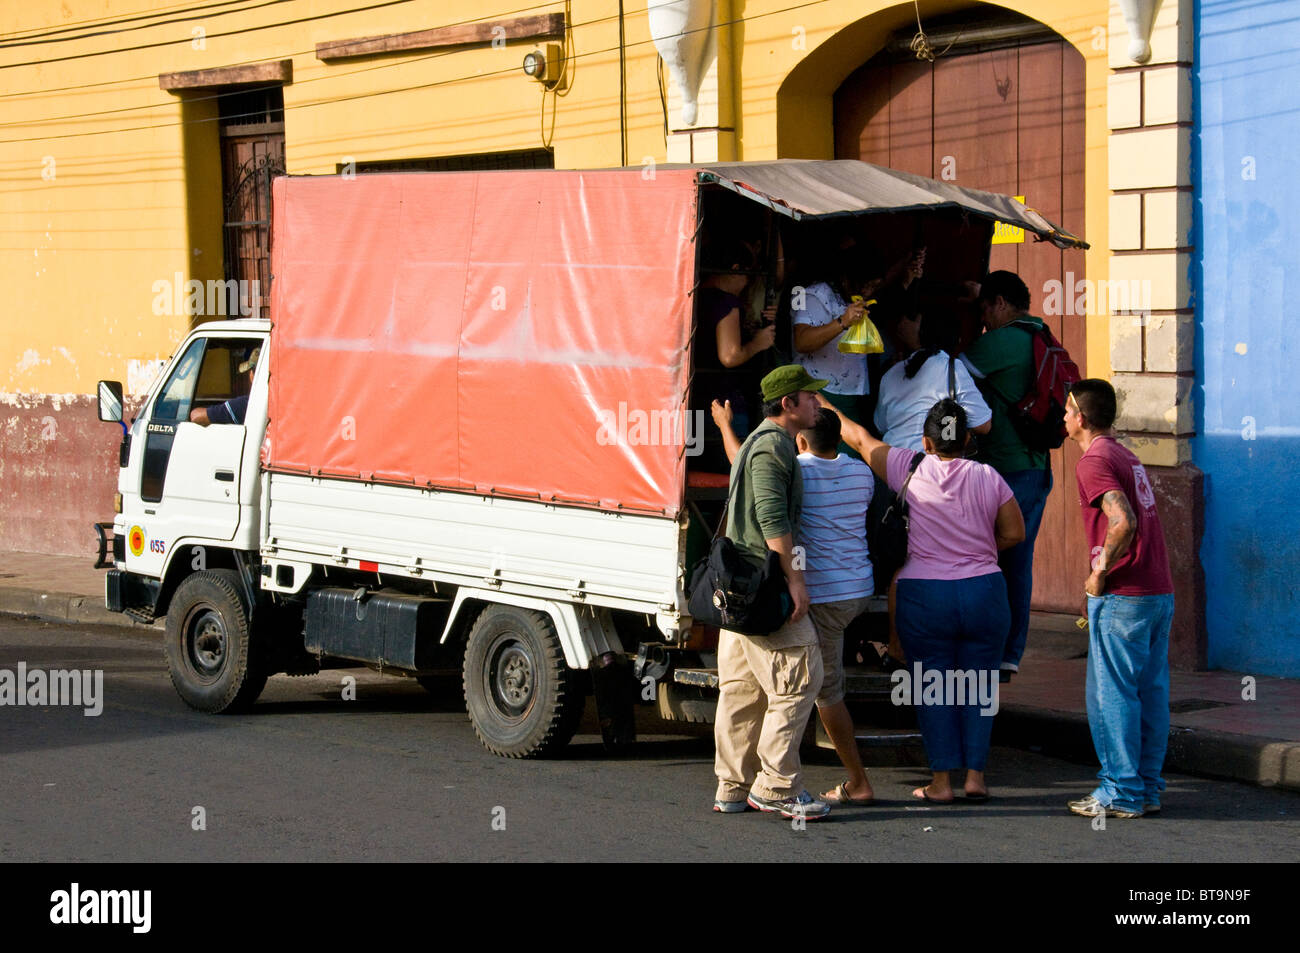 People in a truck used as public transportation Nicaragua city of Leon Stock Photo